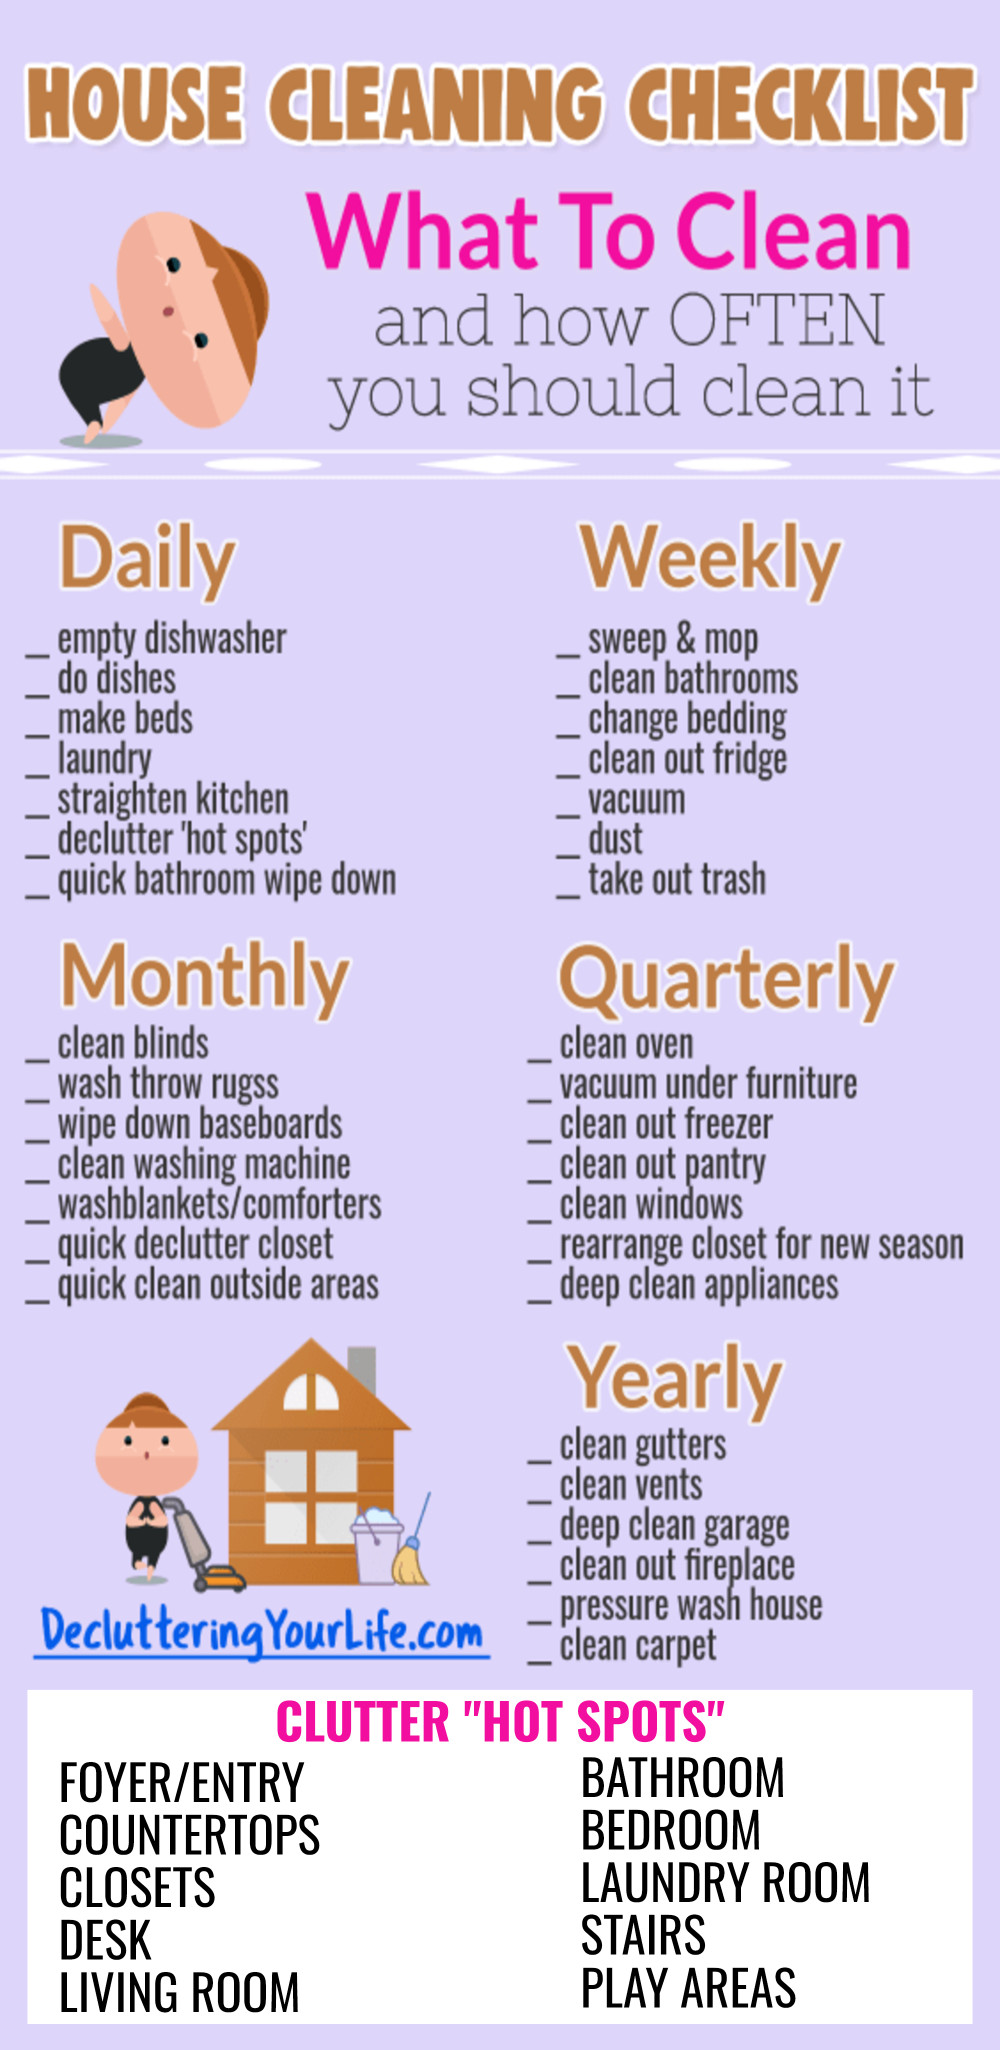 House cleaning checklist what to clean, how often